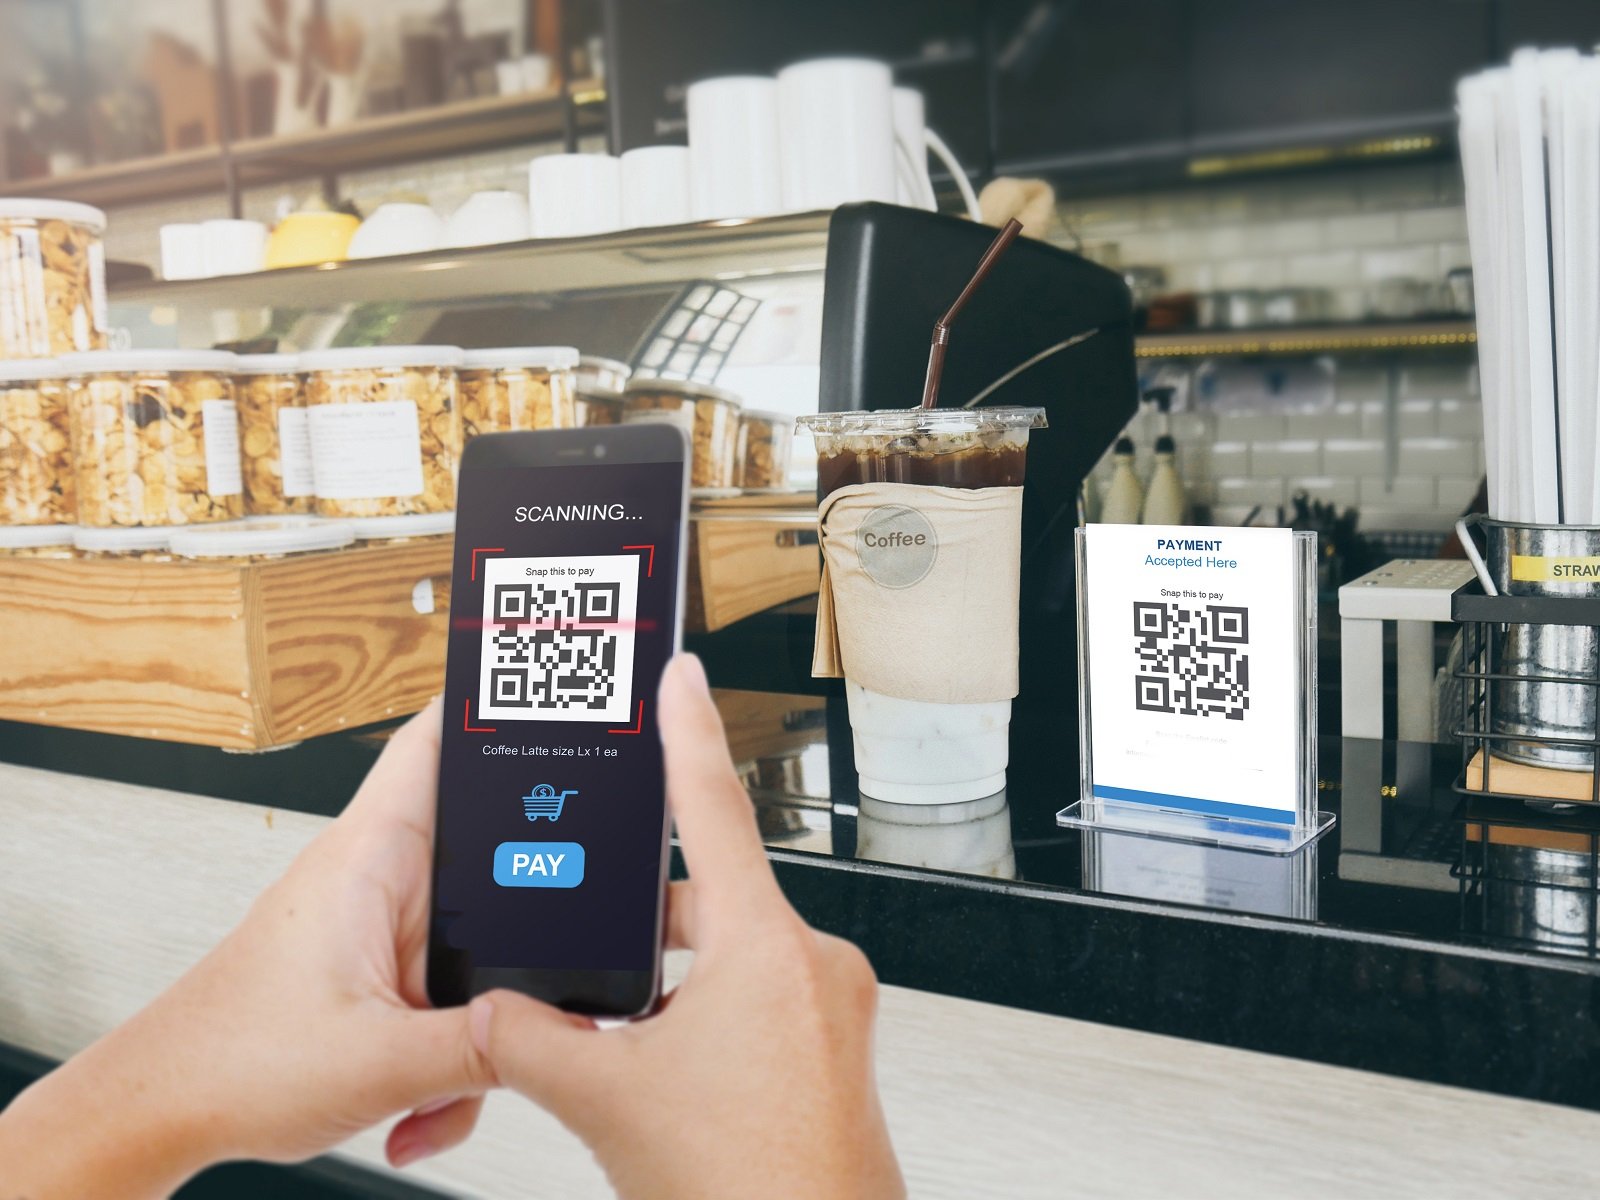 scan qr code in coinbase